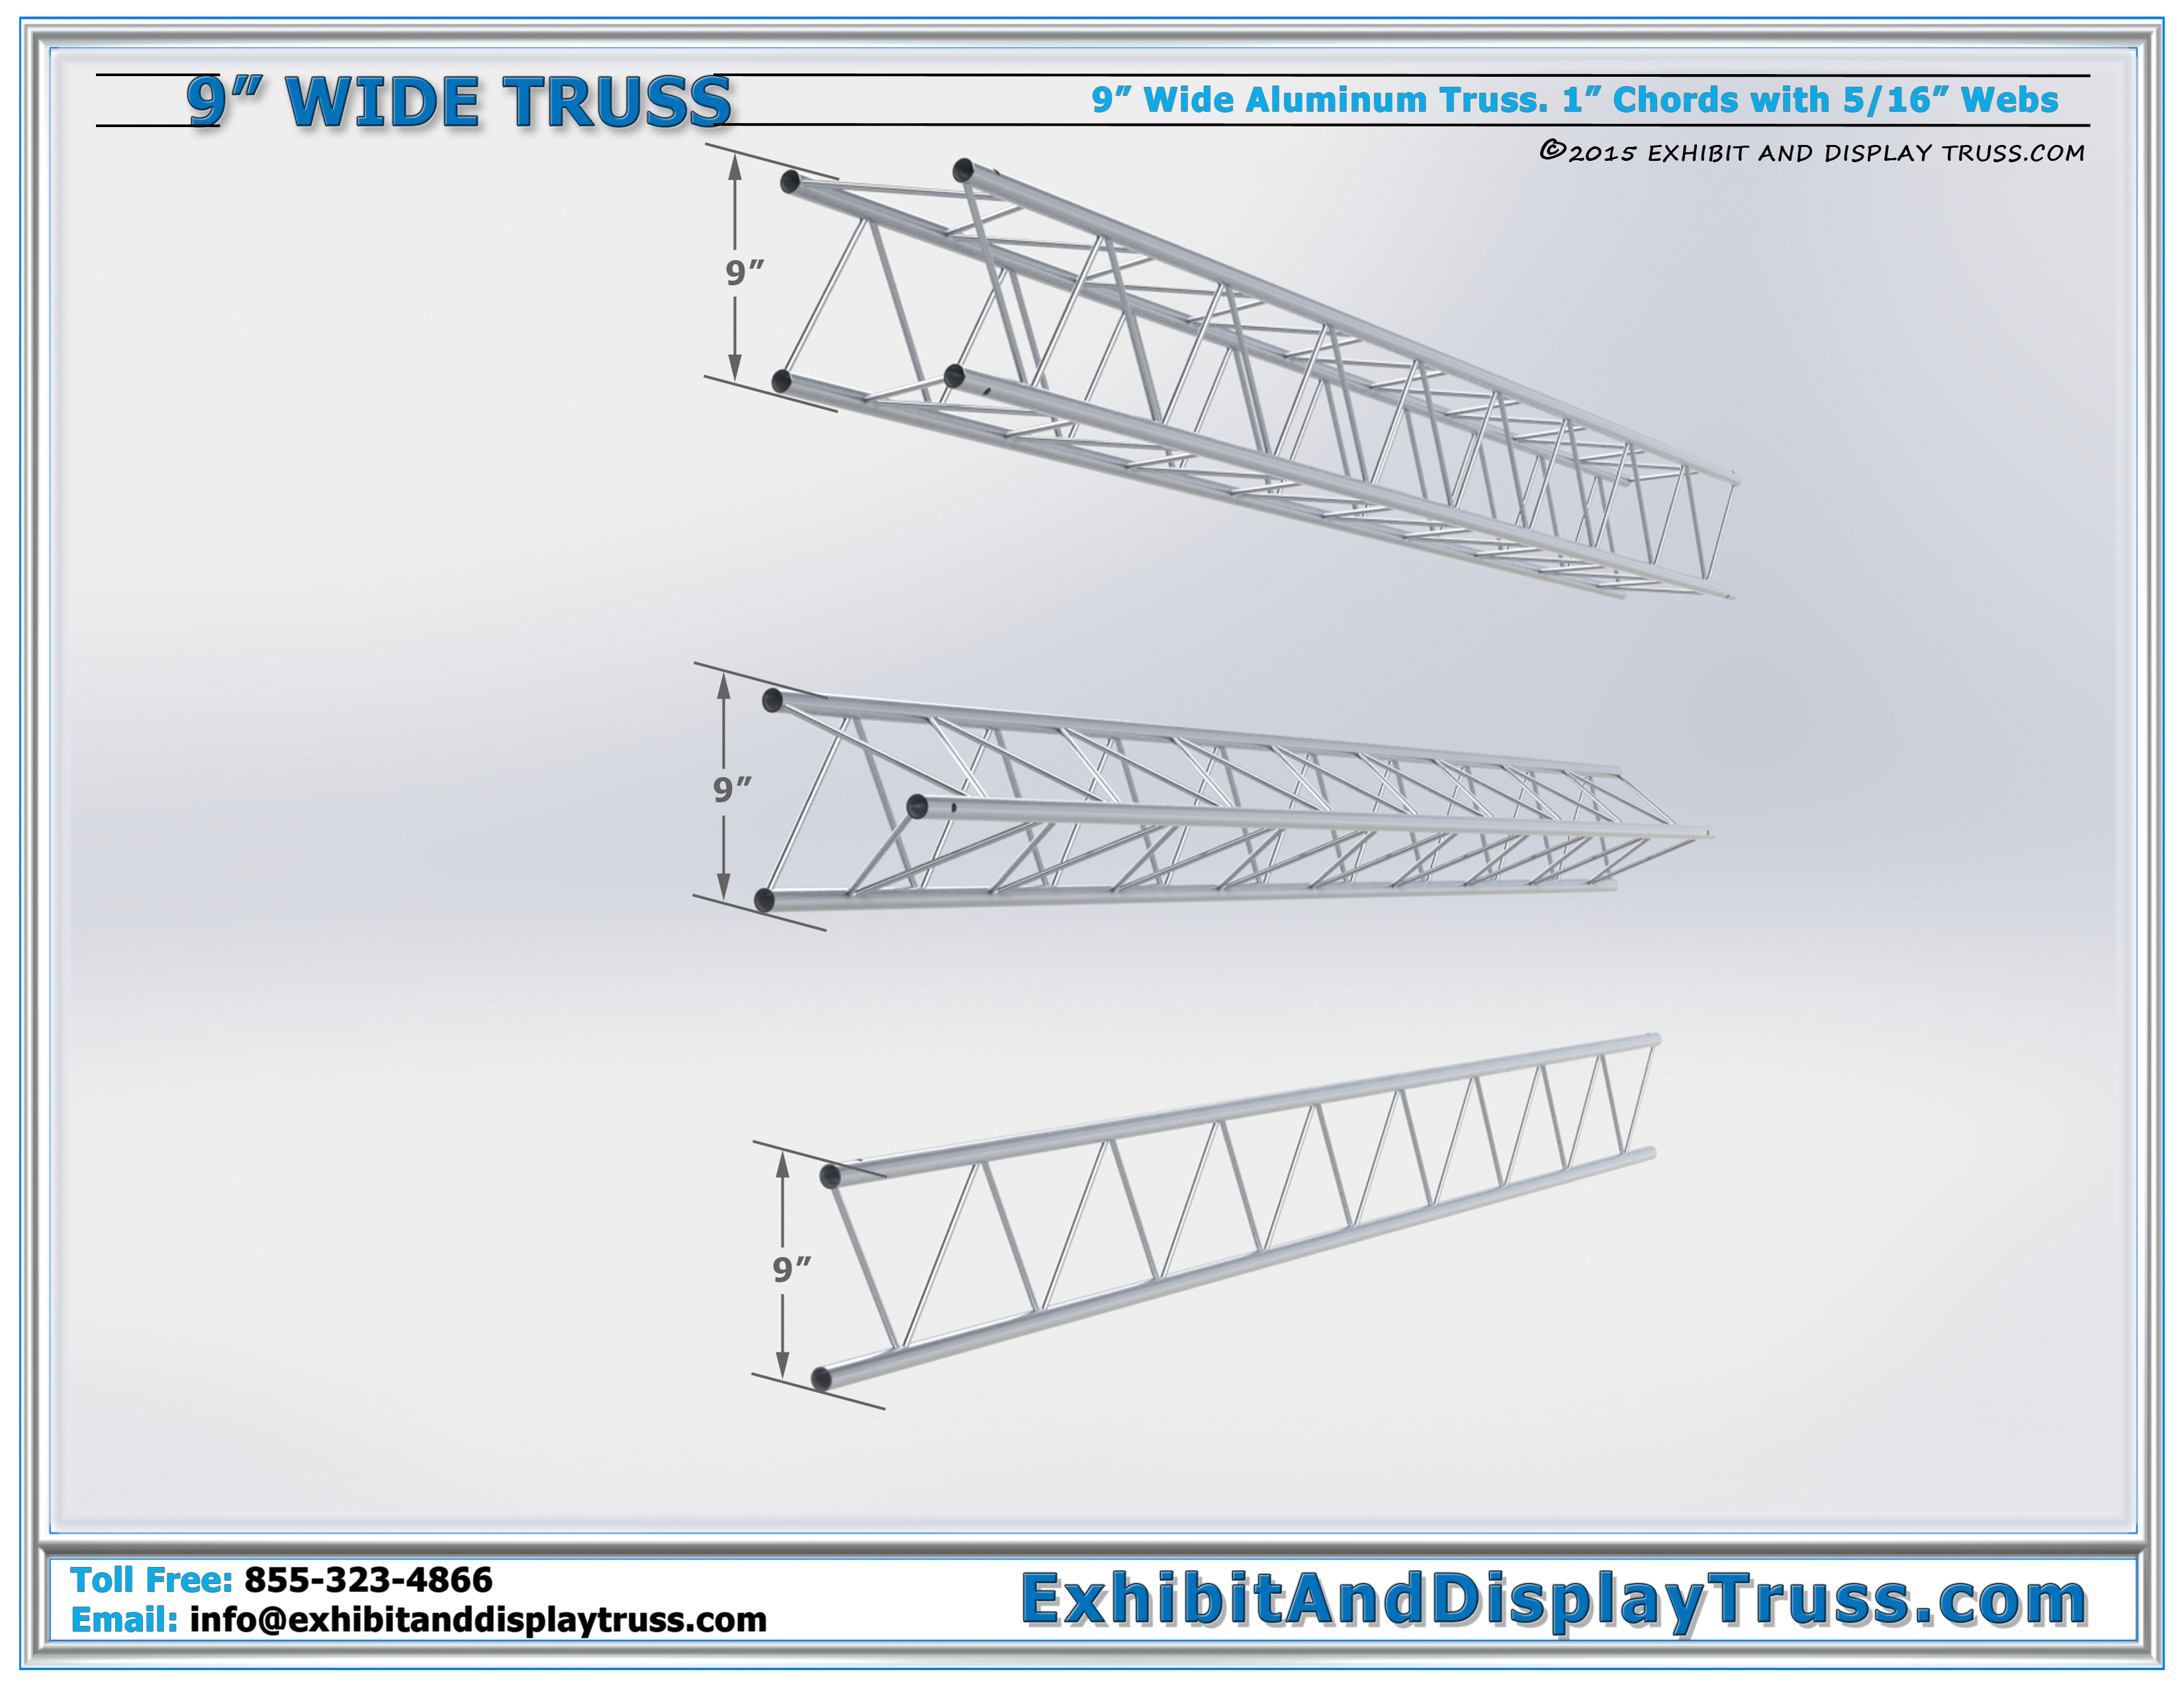 9” Wide Aluminum Truss | Aluminum Display Truss Stocked In: Box / Square, Triangle and Flat / Ladder